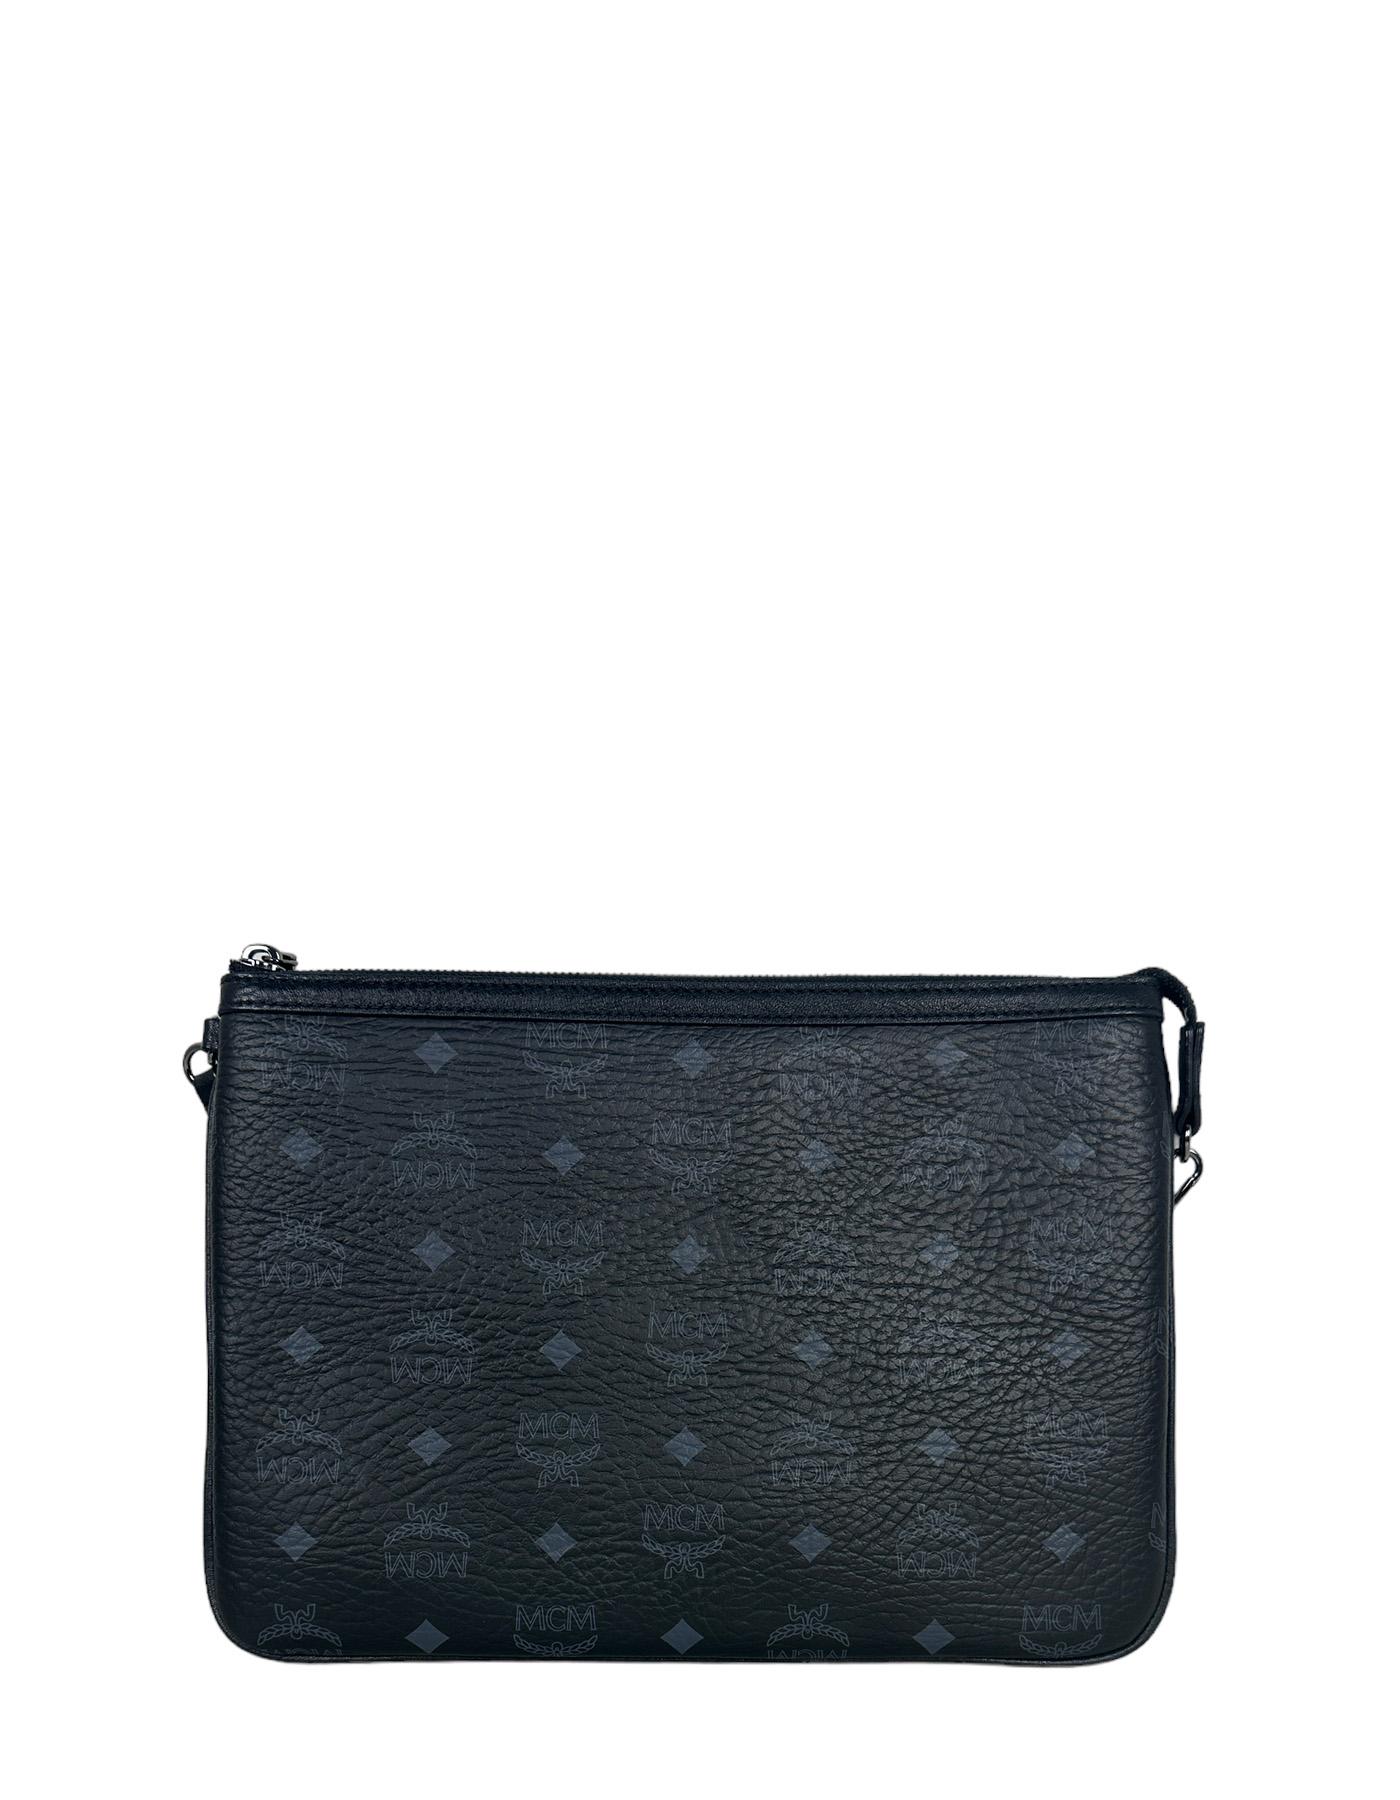 MCM Black Visetos Monogram Pouch Bag. Strap can be moved to also be used as a wristlet
Made In: Korea
Color: Black
Hardware: Darkened silvertone
Materials: Coated canvas
Lining: Fine textile
Closure/Opening: Zip top 
Exterior Pockets: N/a
Interior